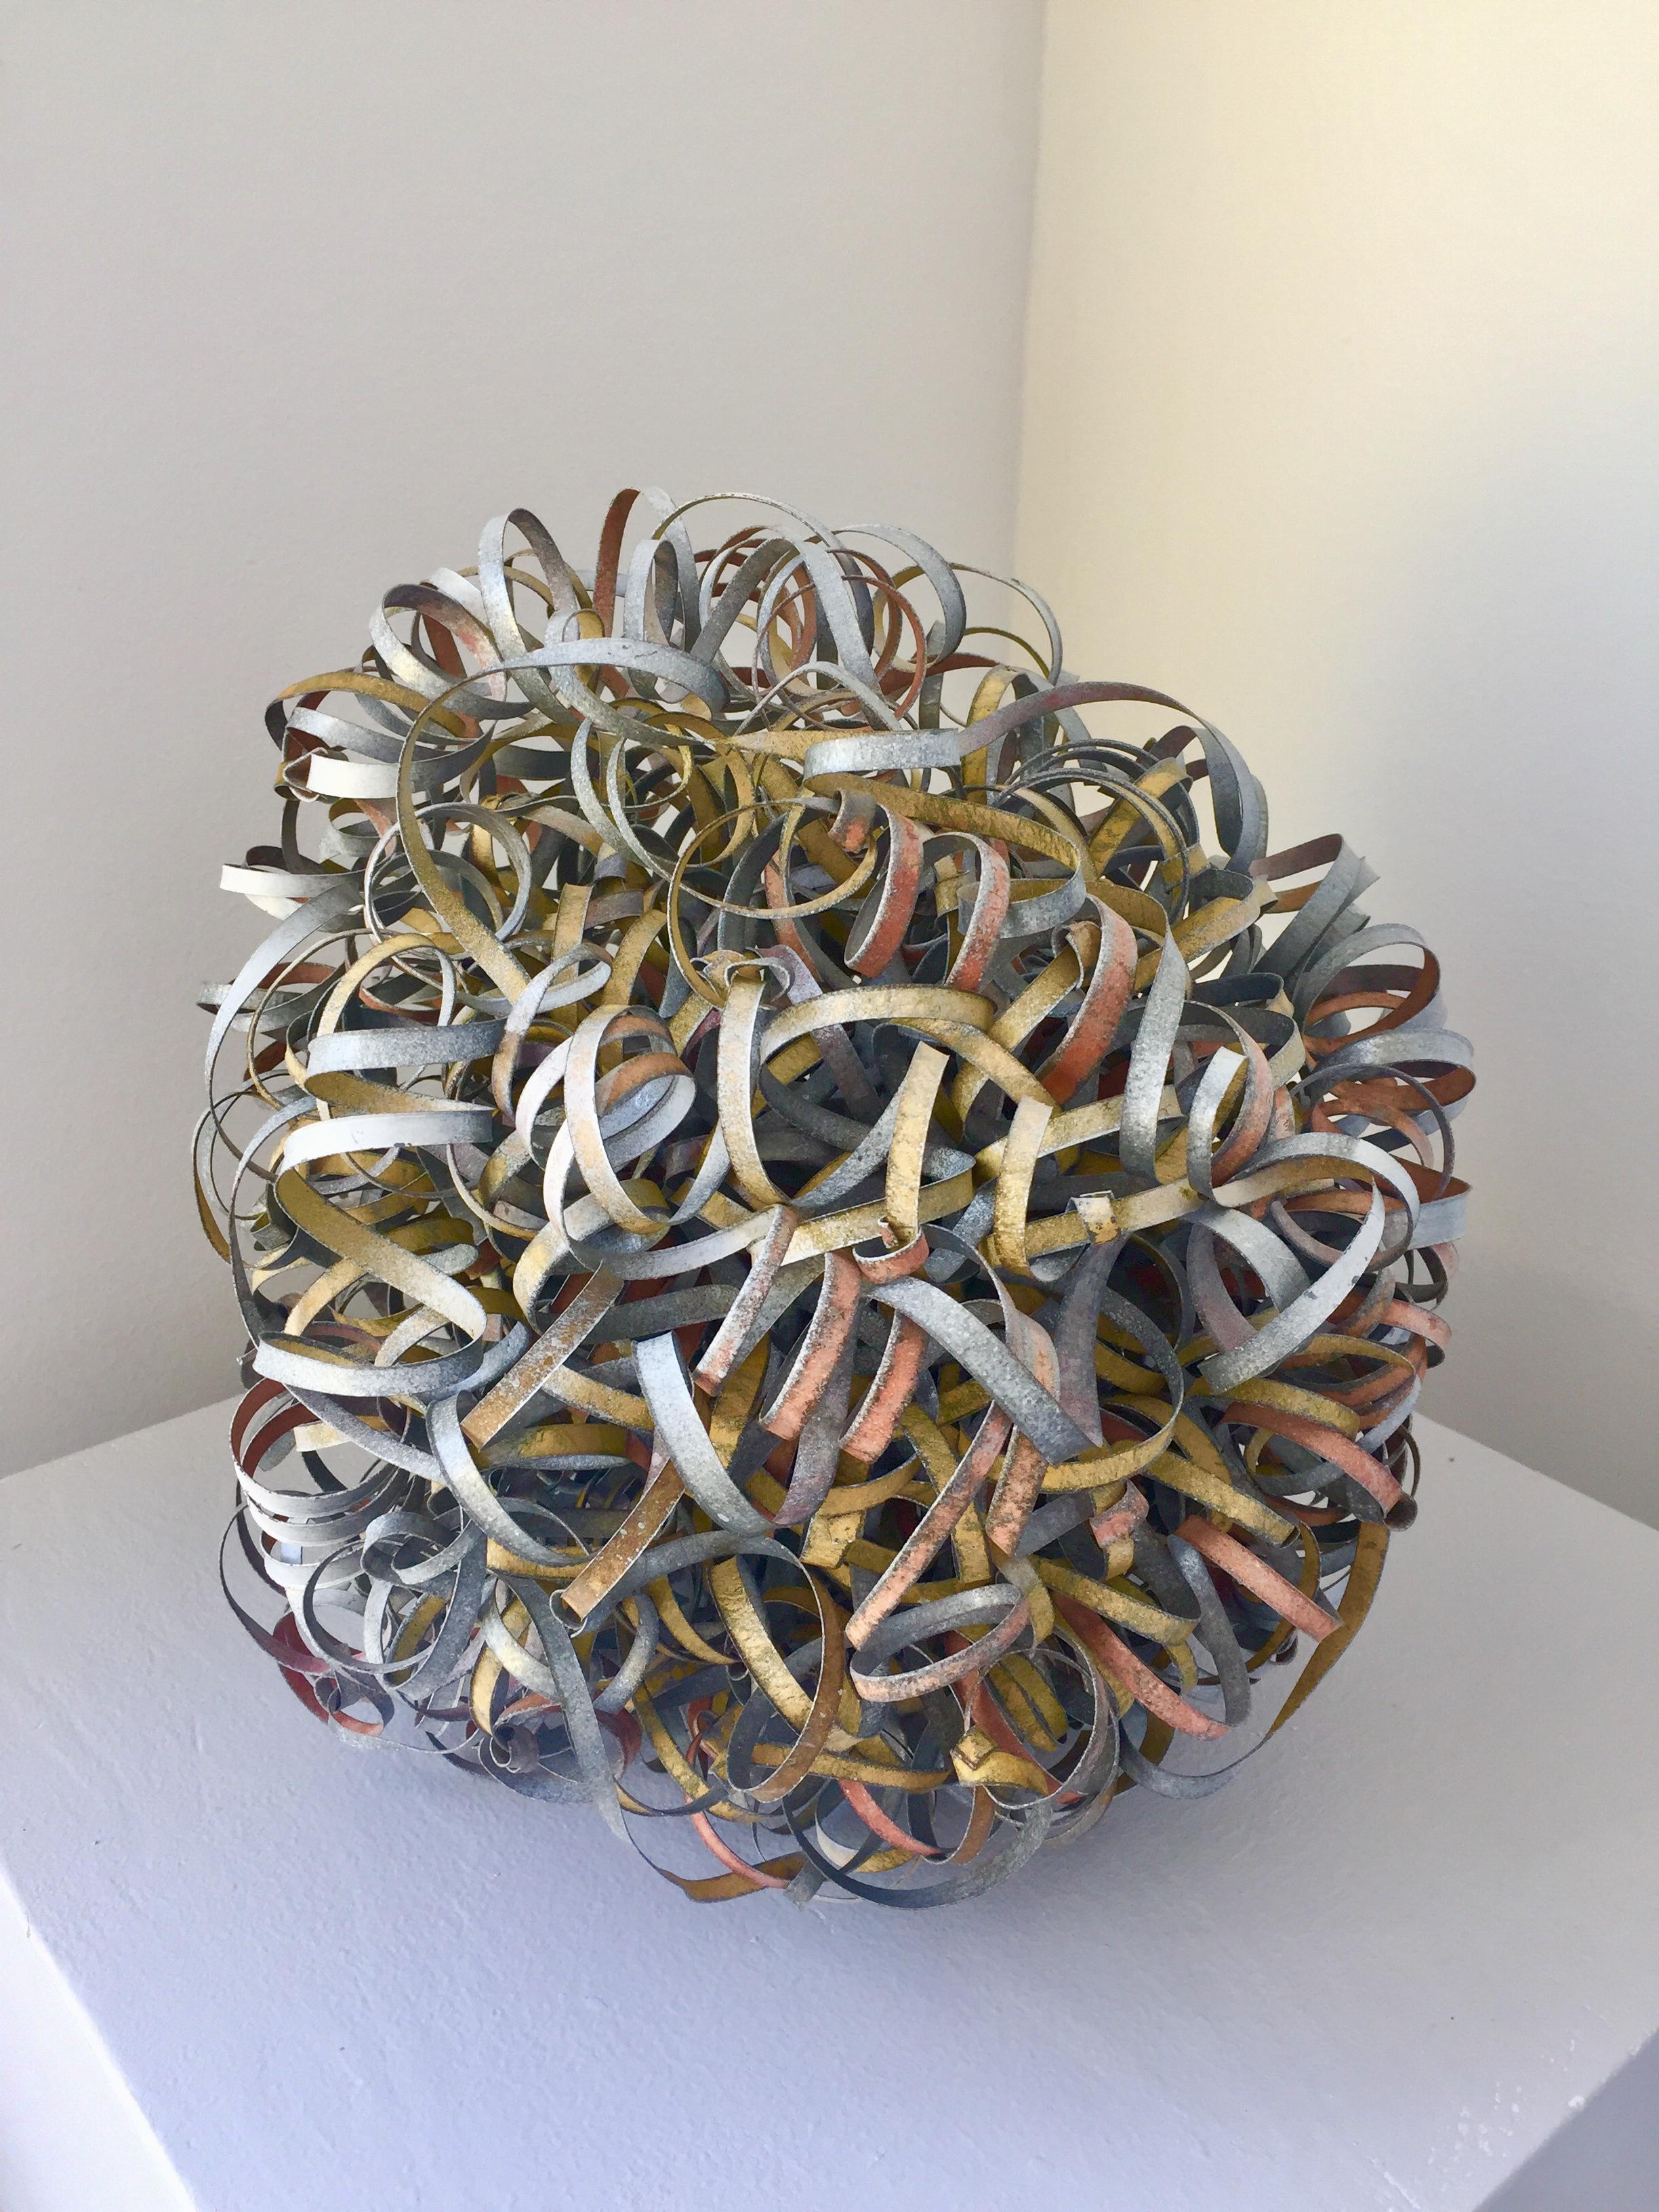 Nathan Slate Joseph Abstract Sculpture - Copper Wire Spiral Ball Sculpture (Silver and Gold) 